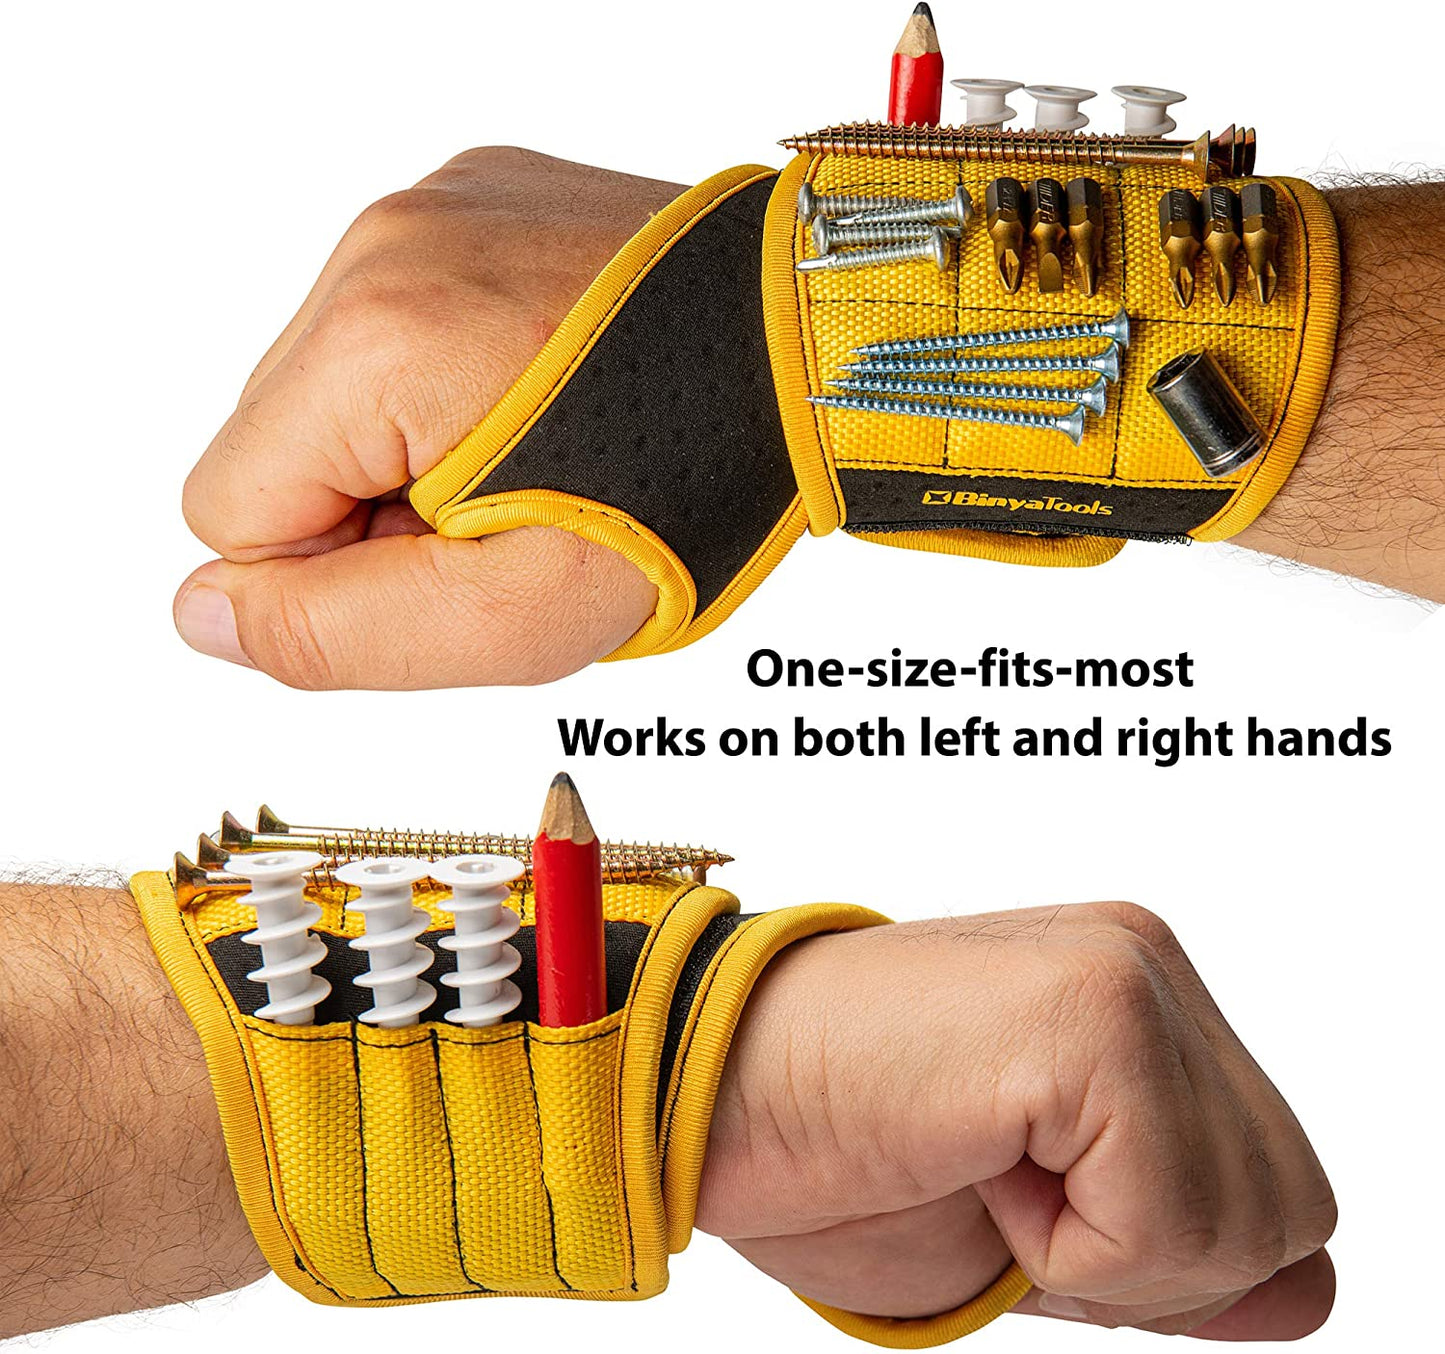 Magnetic Wristband With Super Strong Magnets Holds Screws, Nails, Drill Bit. Unique Wrist Support Design Cool Handy Gadget Gift for Fathers, Boyfriends, Handyman, Electrician, Contractor